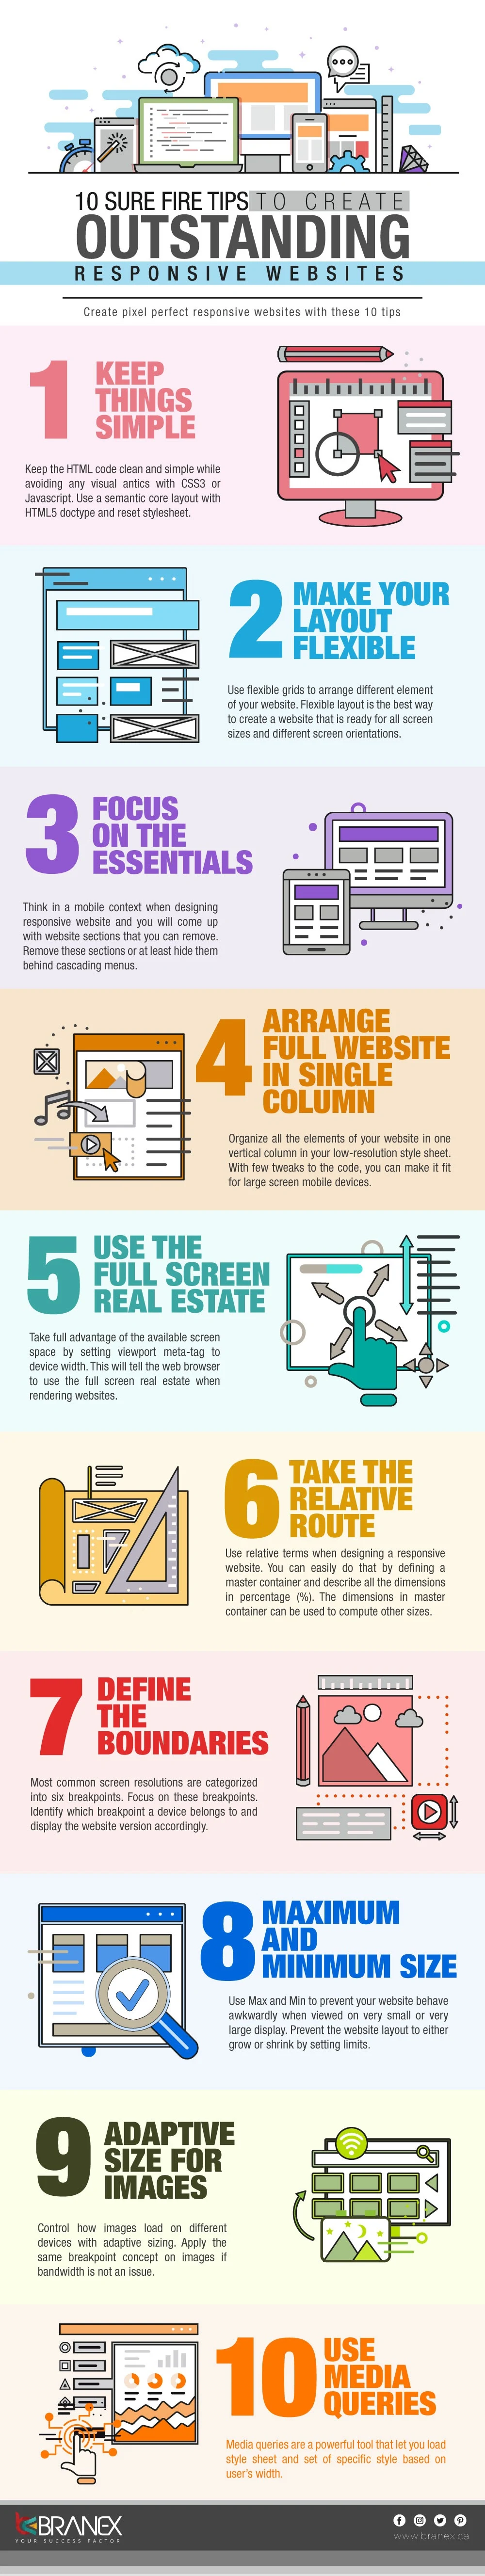 10 Sure-Fire Tips to Create Outstanding Responsive Websites #infographic